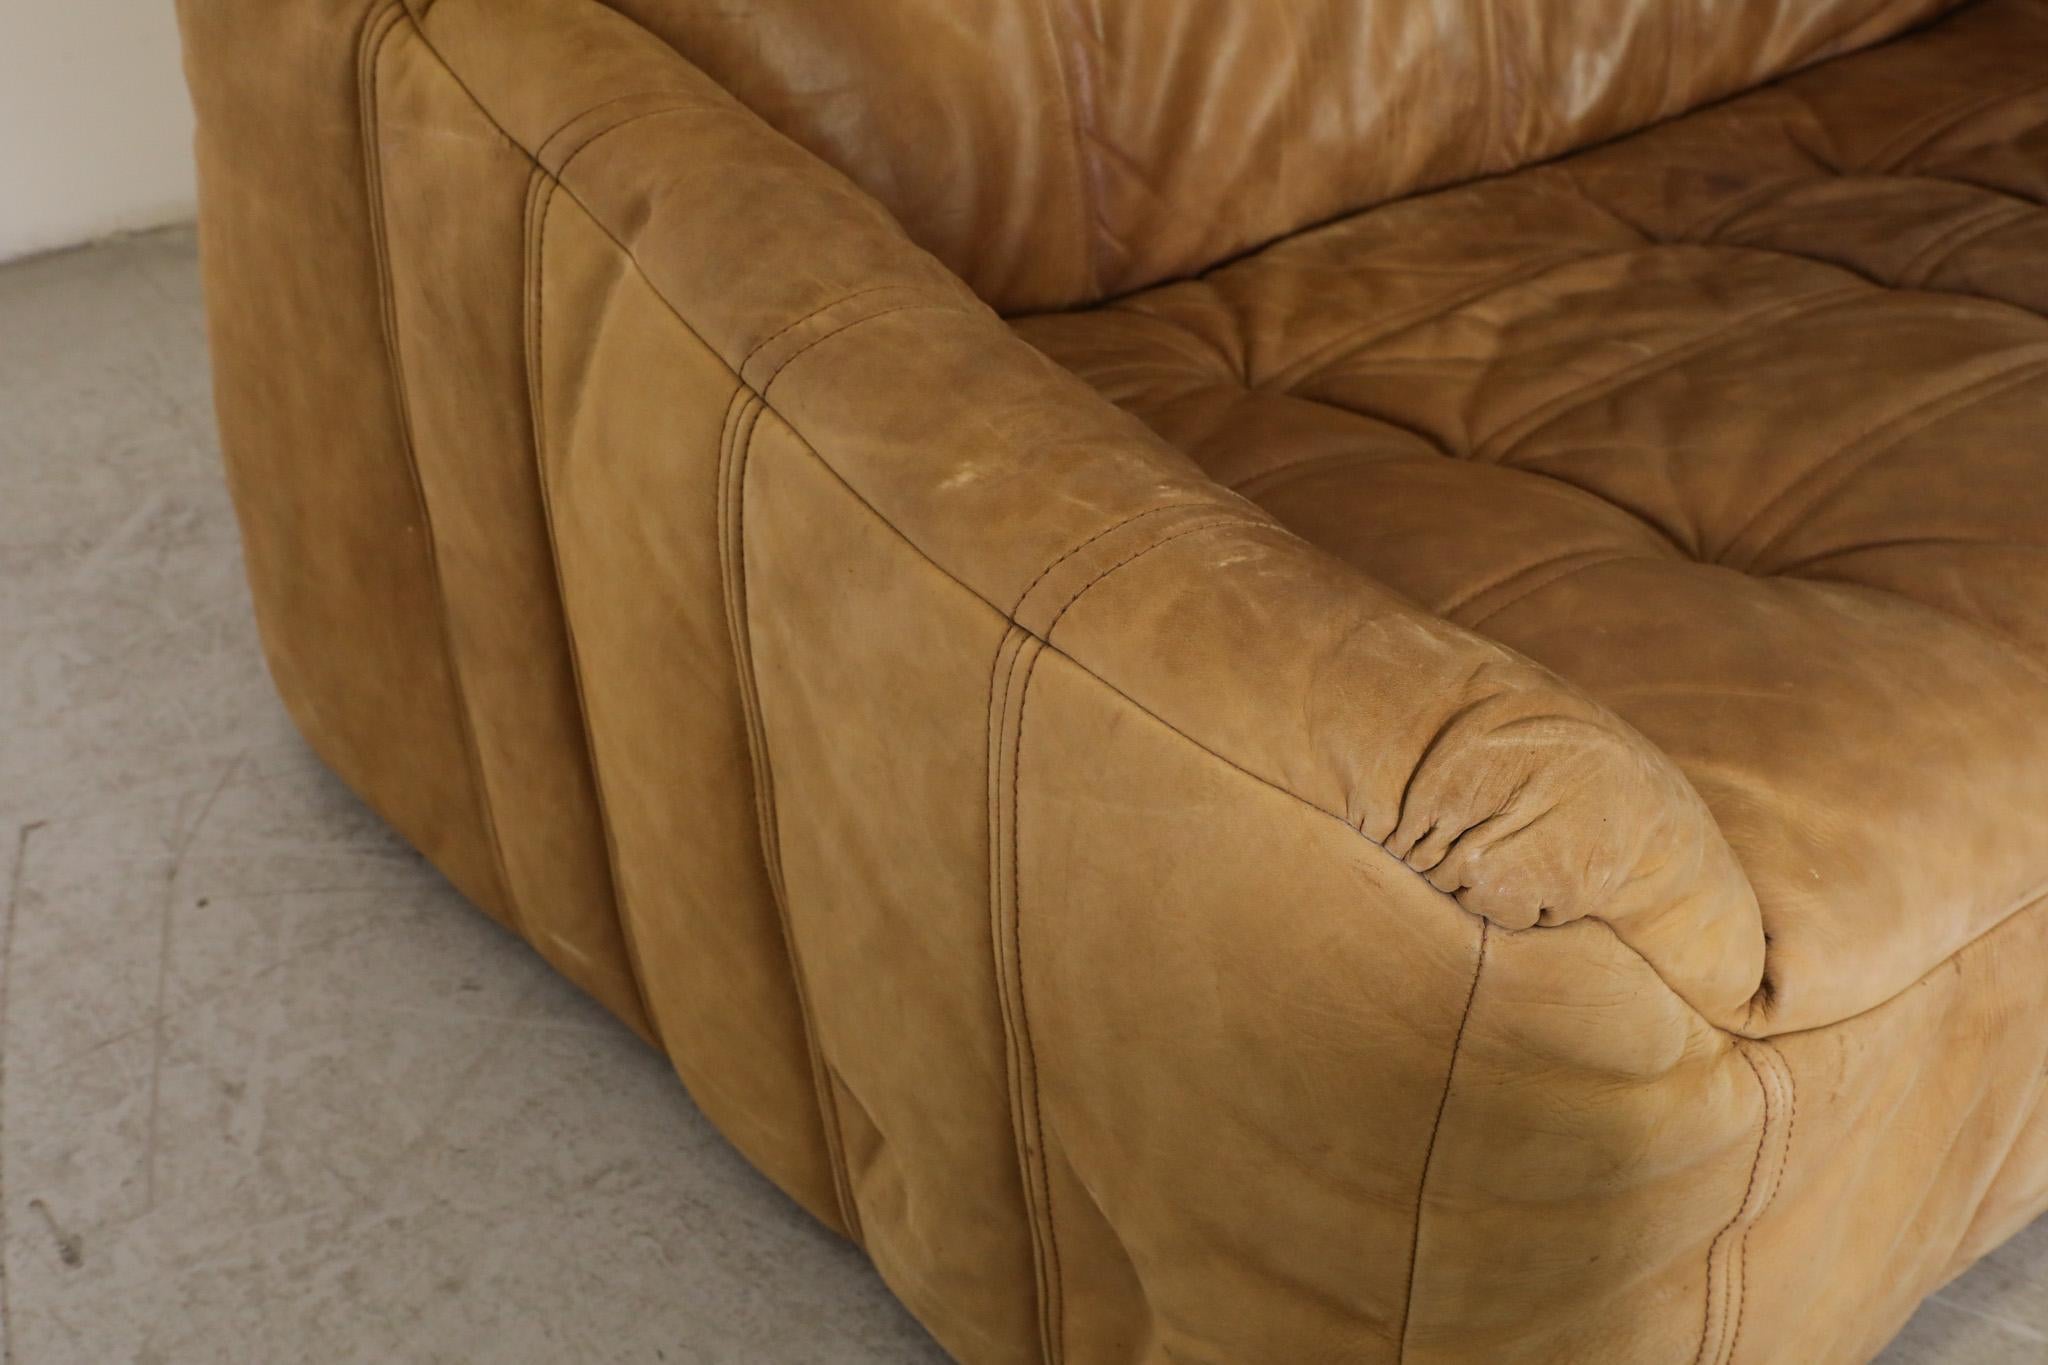 Rolf Benz Soft Form Buck Leather Loveseats, 1970s For Sale 12